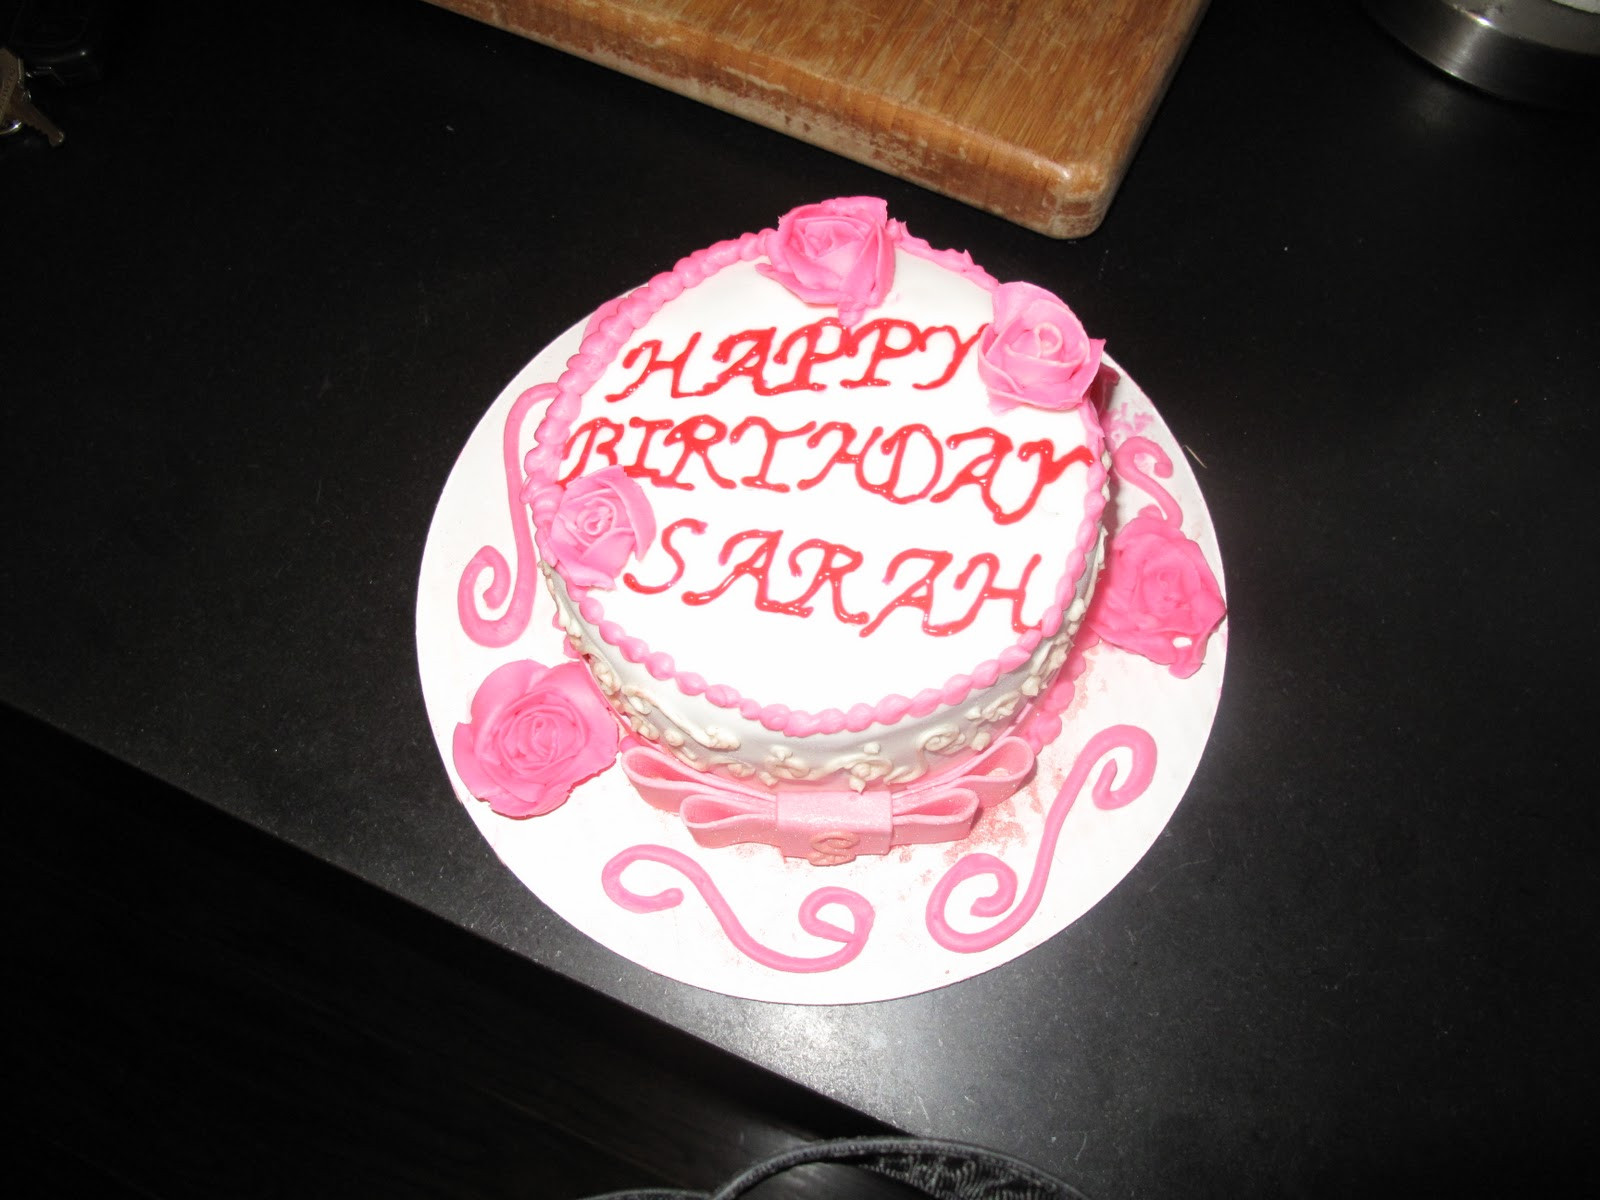 Happy Birthday Sarah Cake
 Confections A Teenage Chef Happy Birthday Sarah